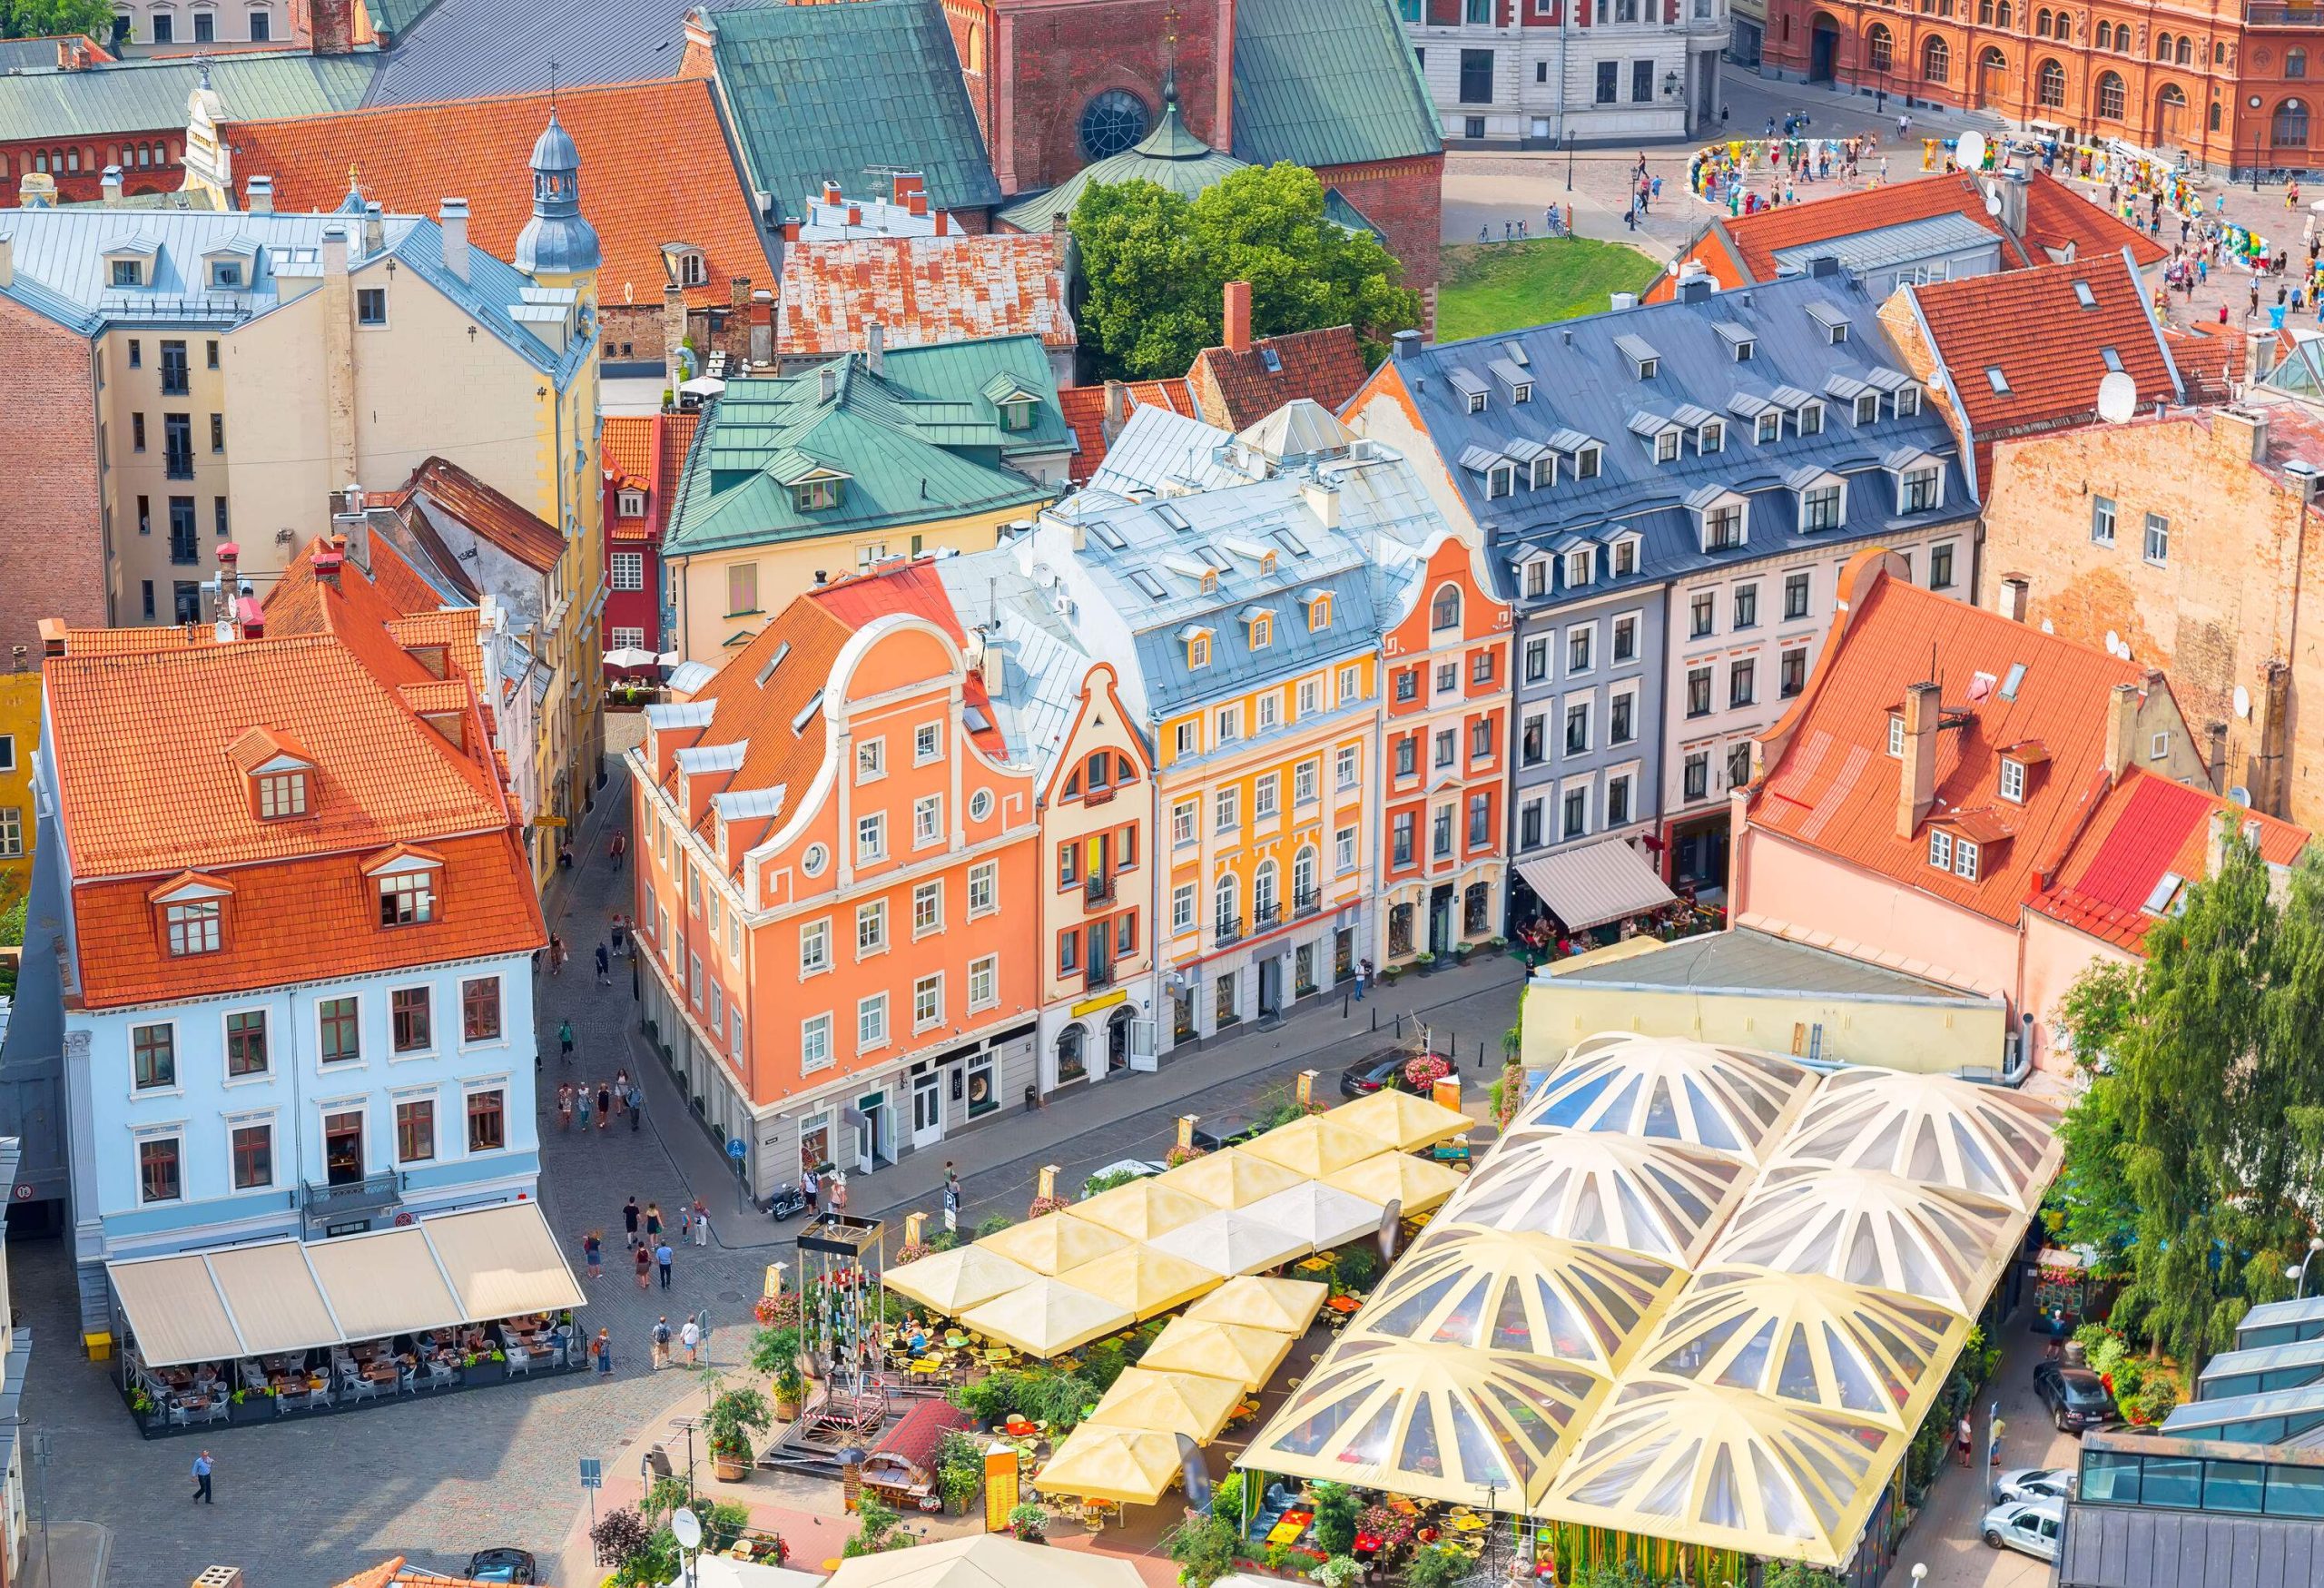 A vibrant market square with flower stands and vividly coloured buildings.